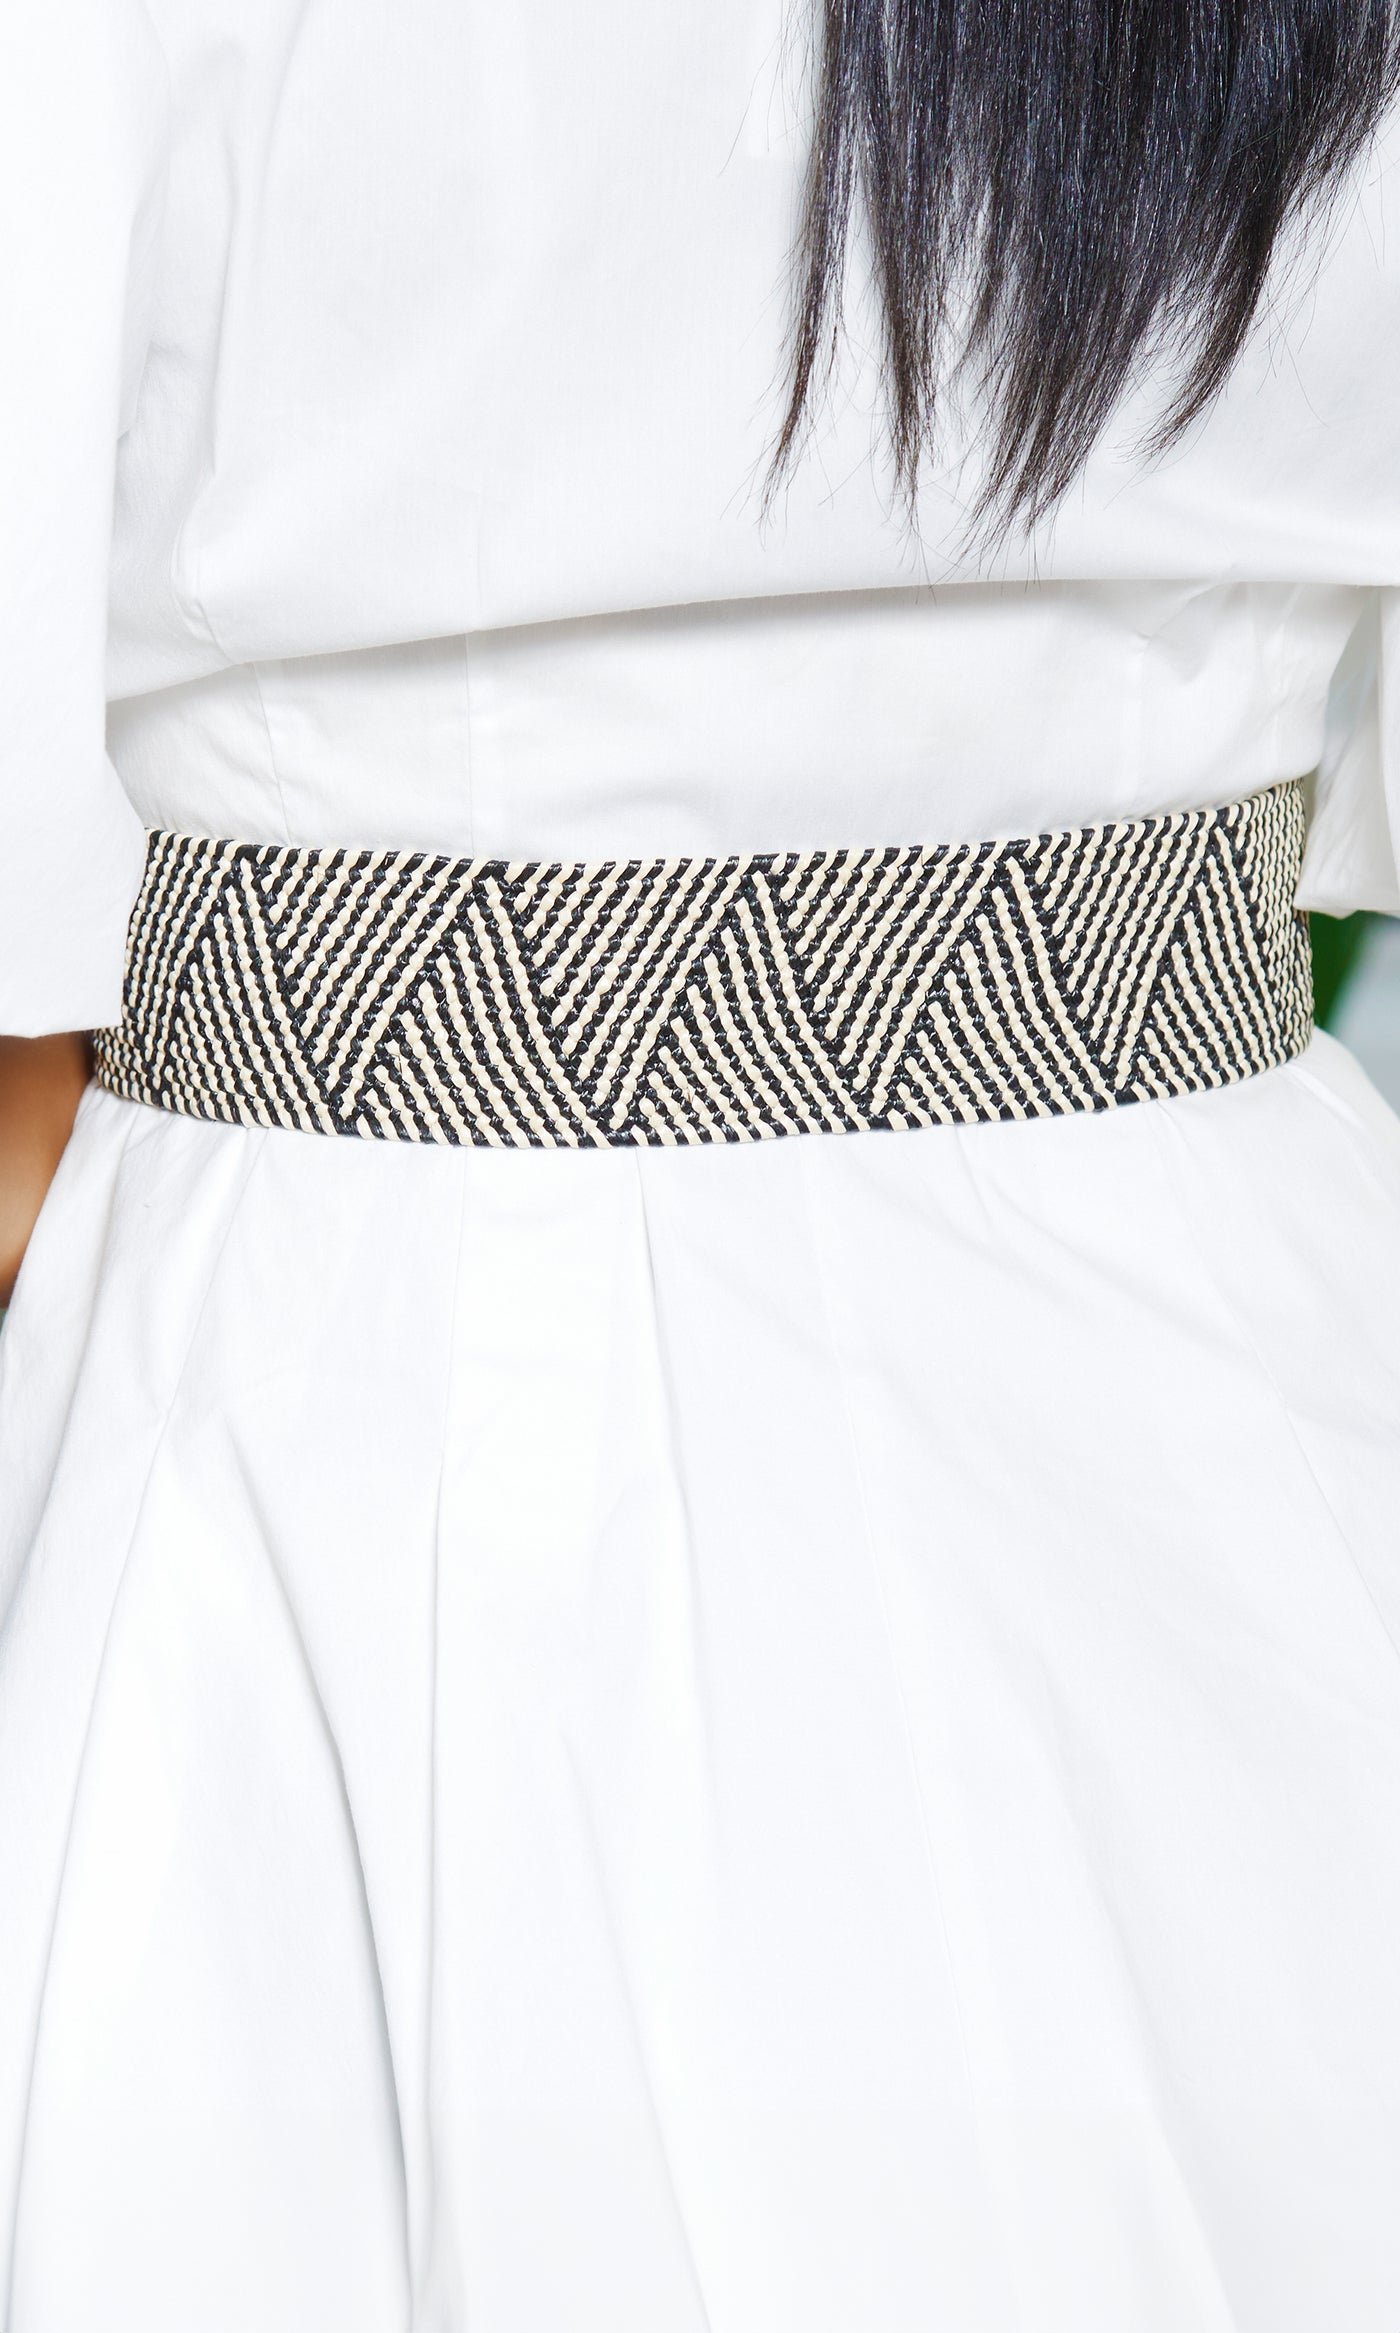 Elegant Contrast Belt with Gold Buckle - Cutely Covered